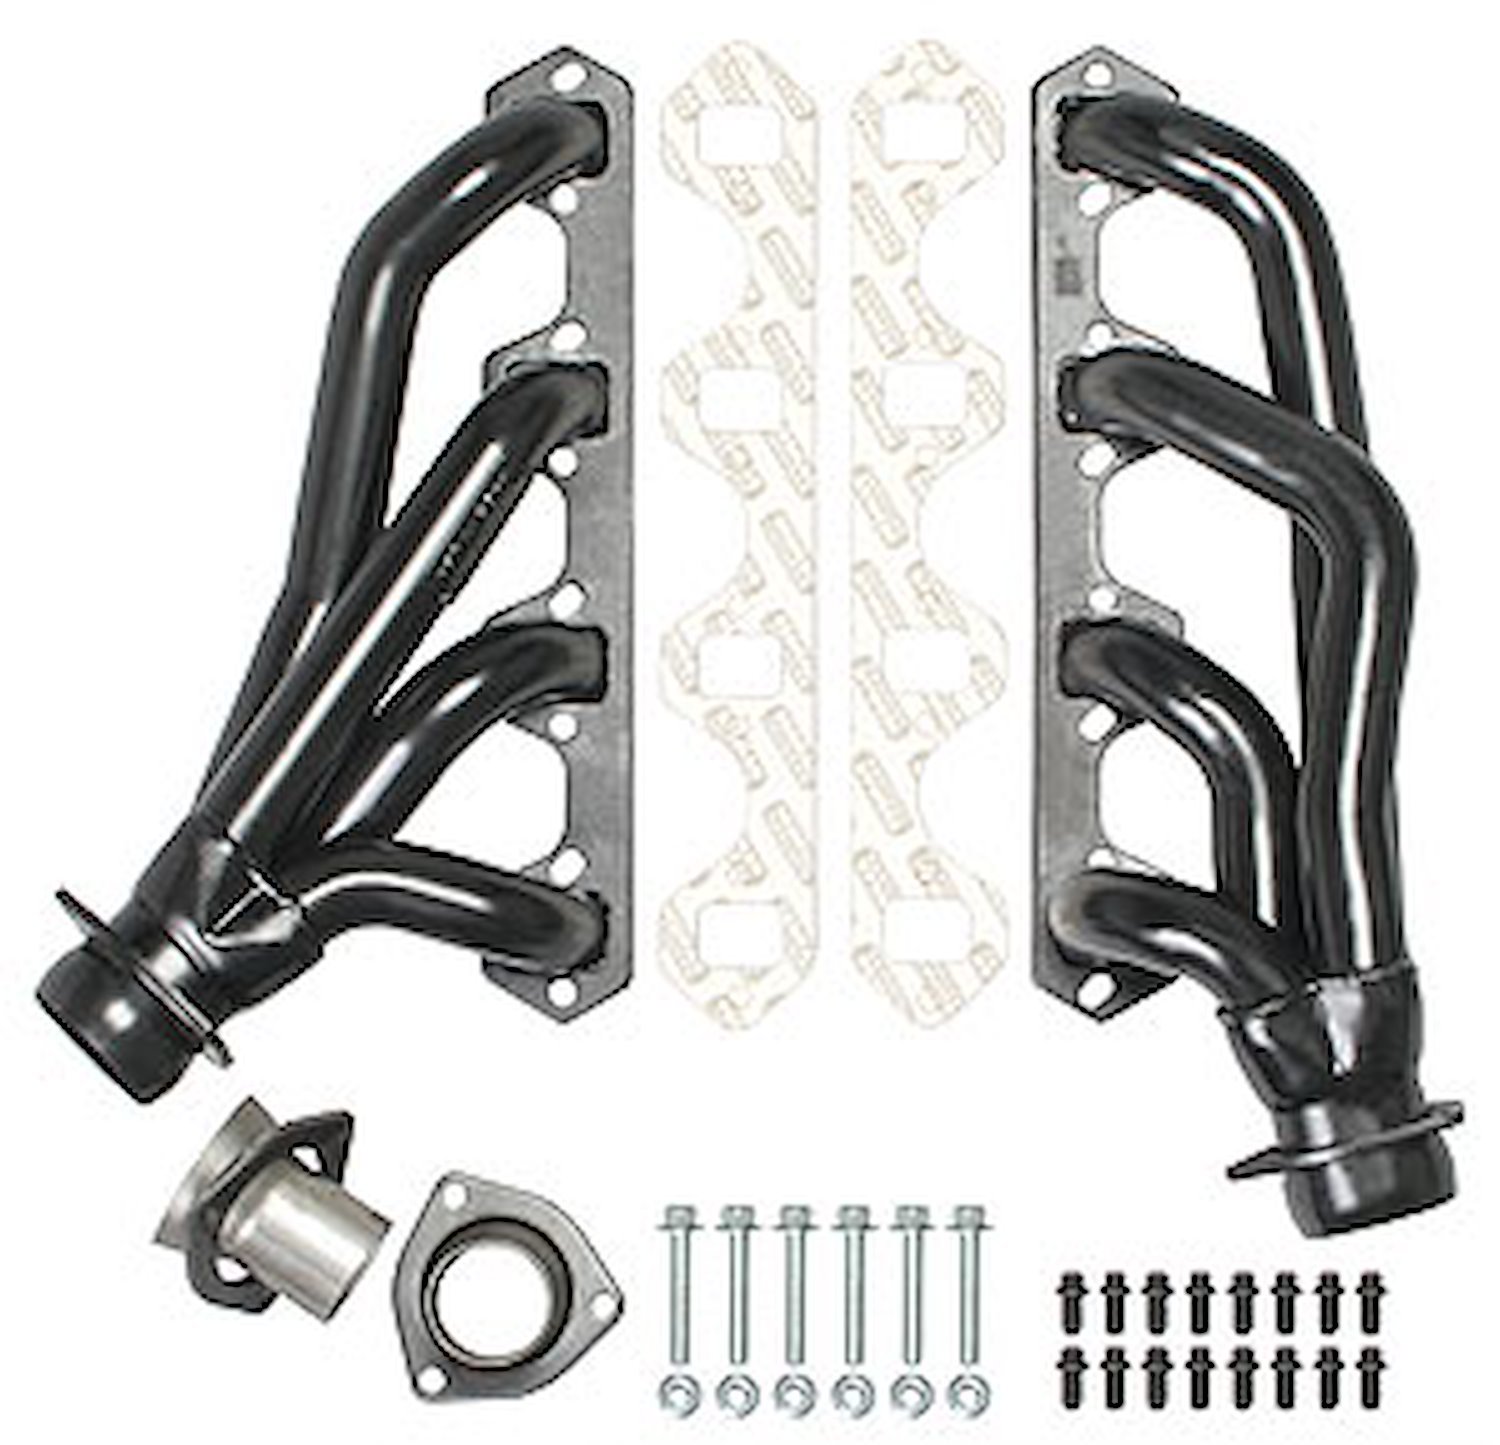 Standard Duty Uncoated Headers for 1964-73 Mustang